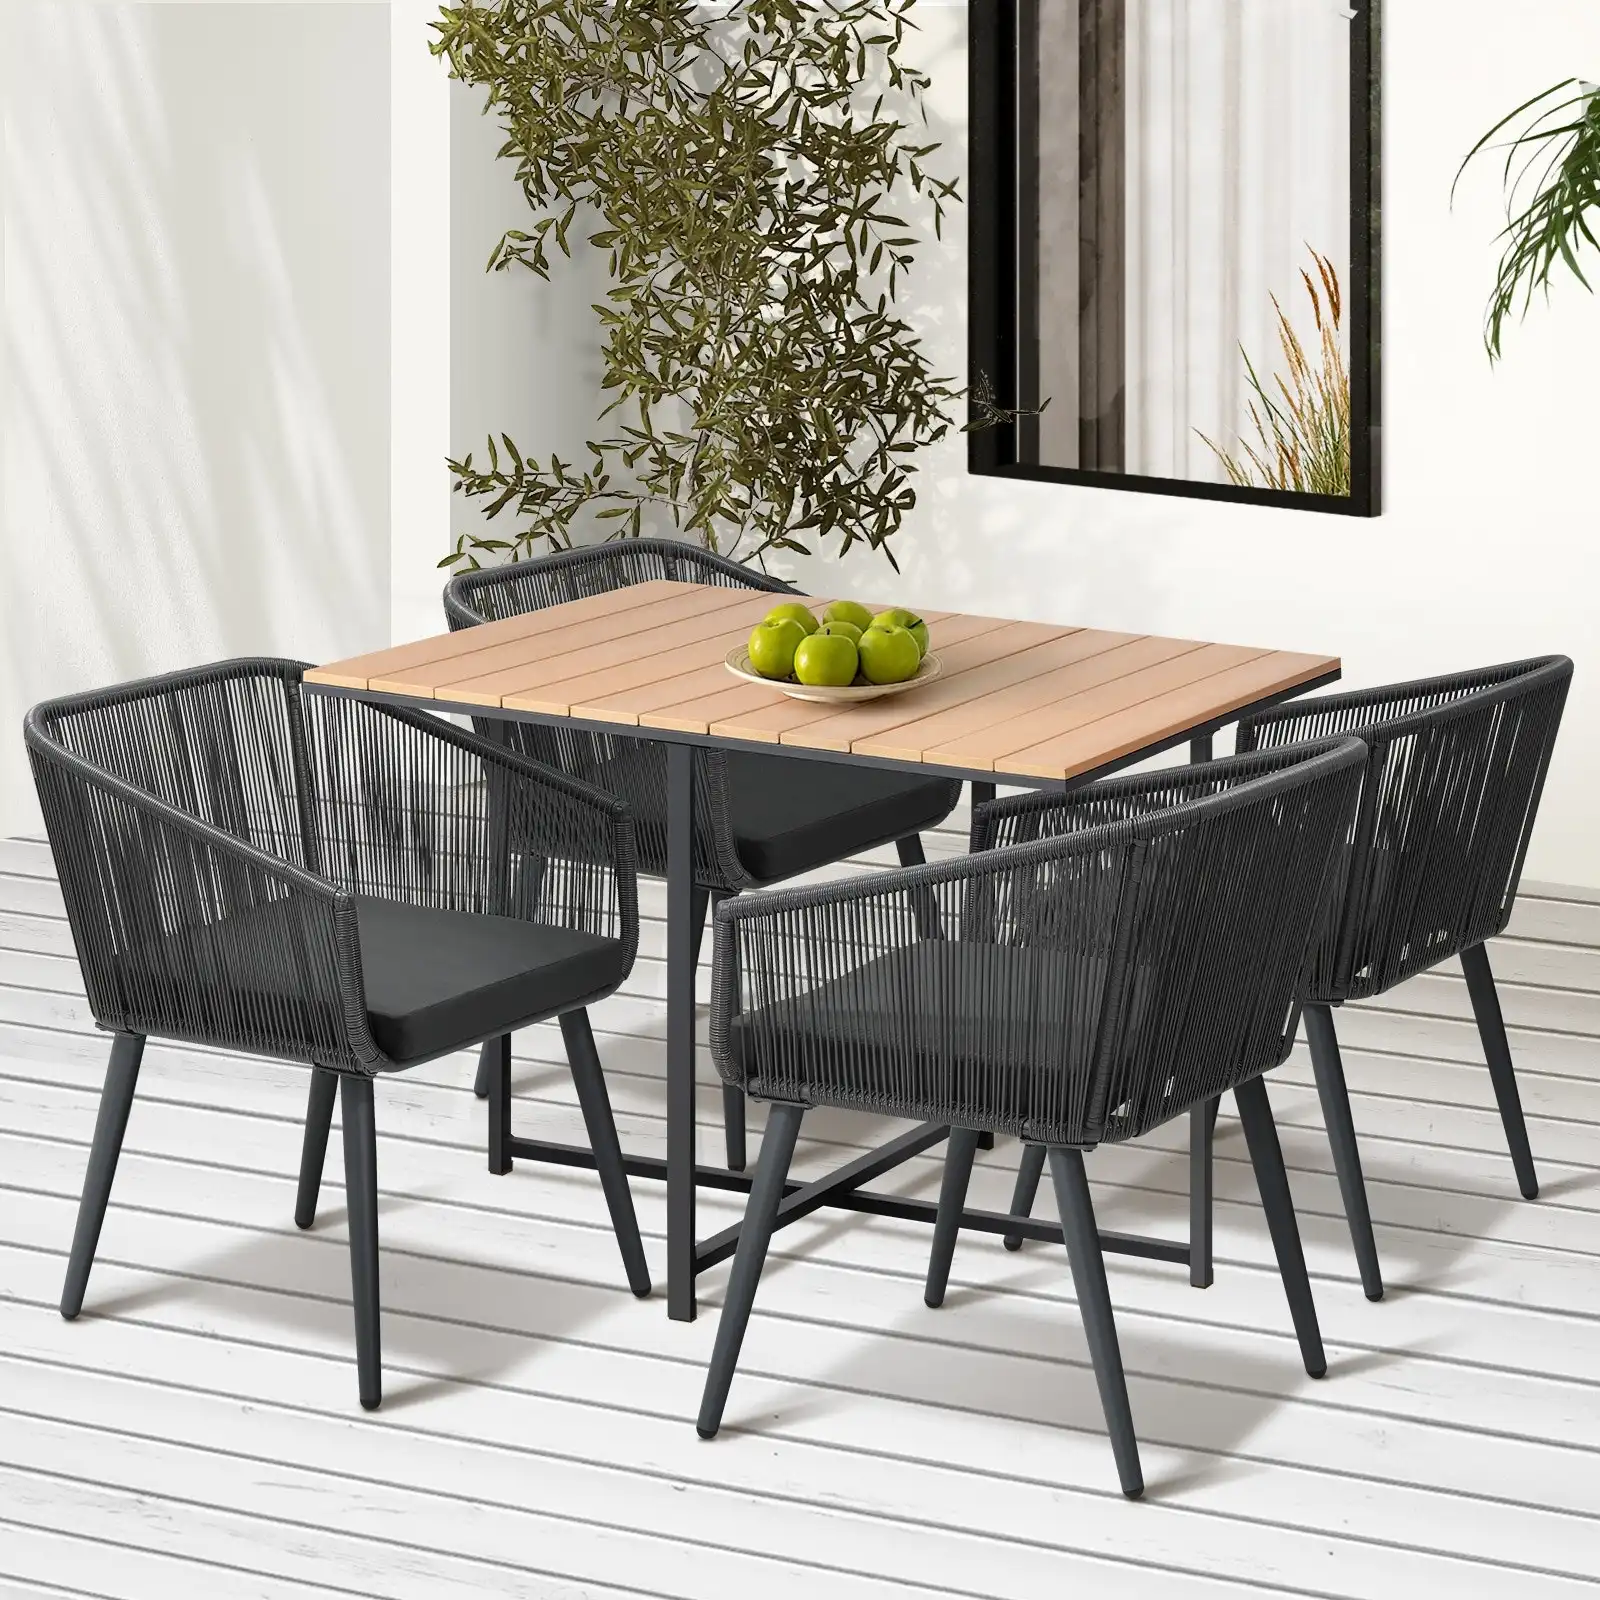 Livsip 5PCS Outdoor Dining Set Furniture Table Lounge Chairs Patio Setting